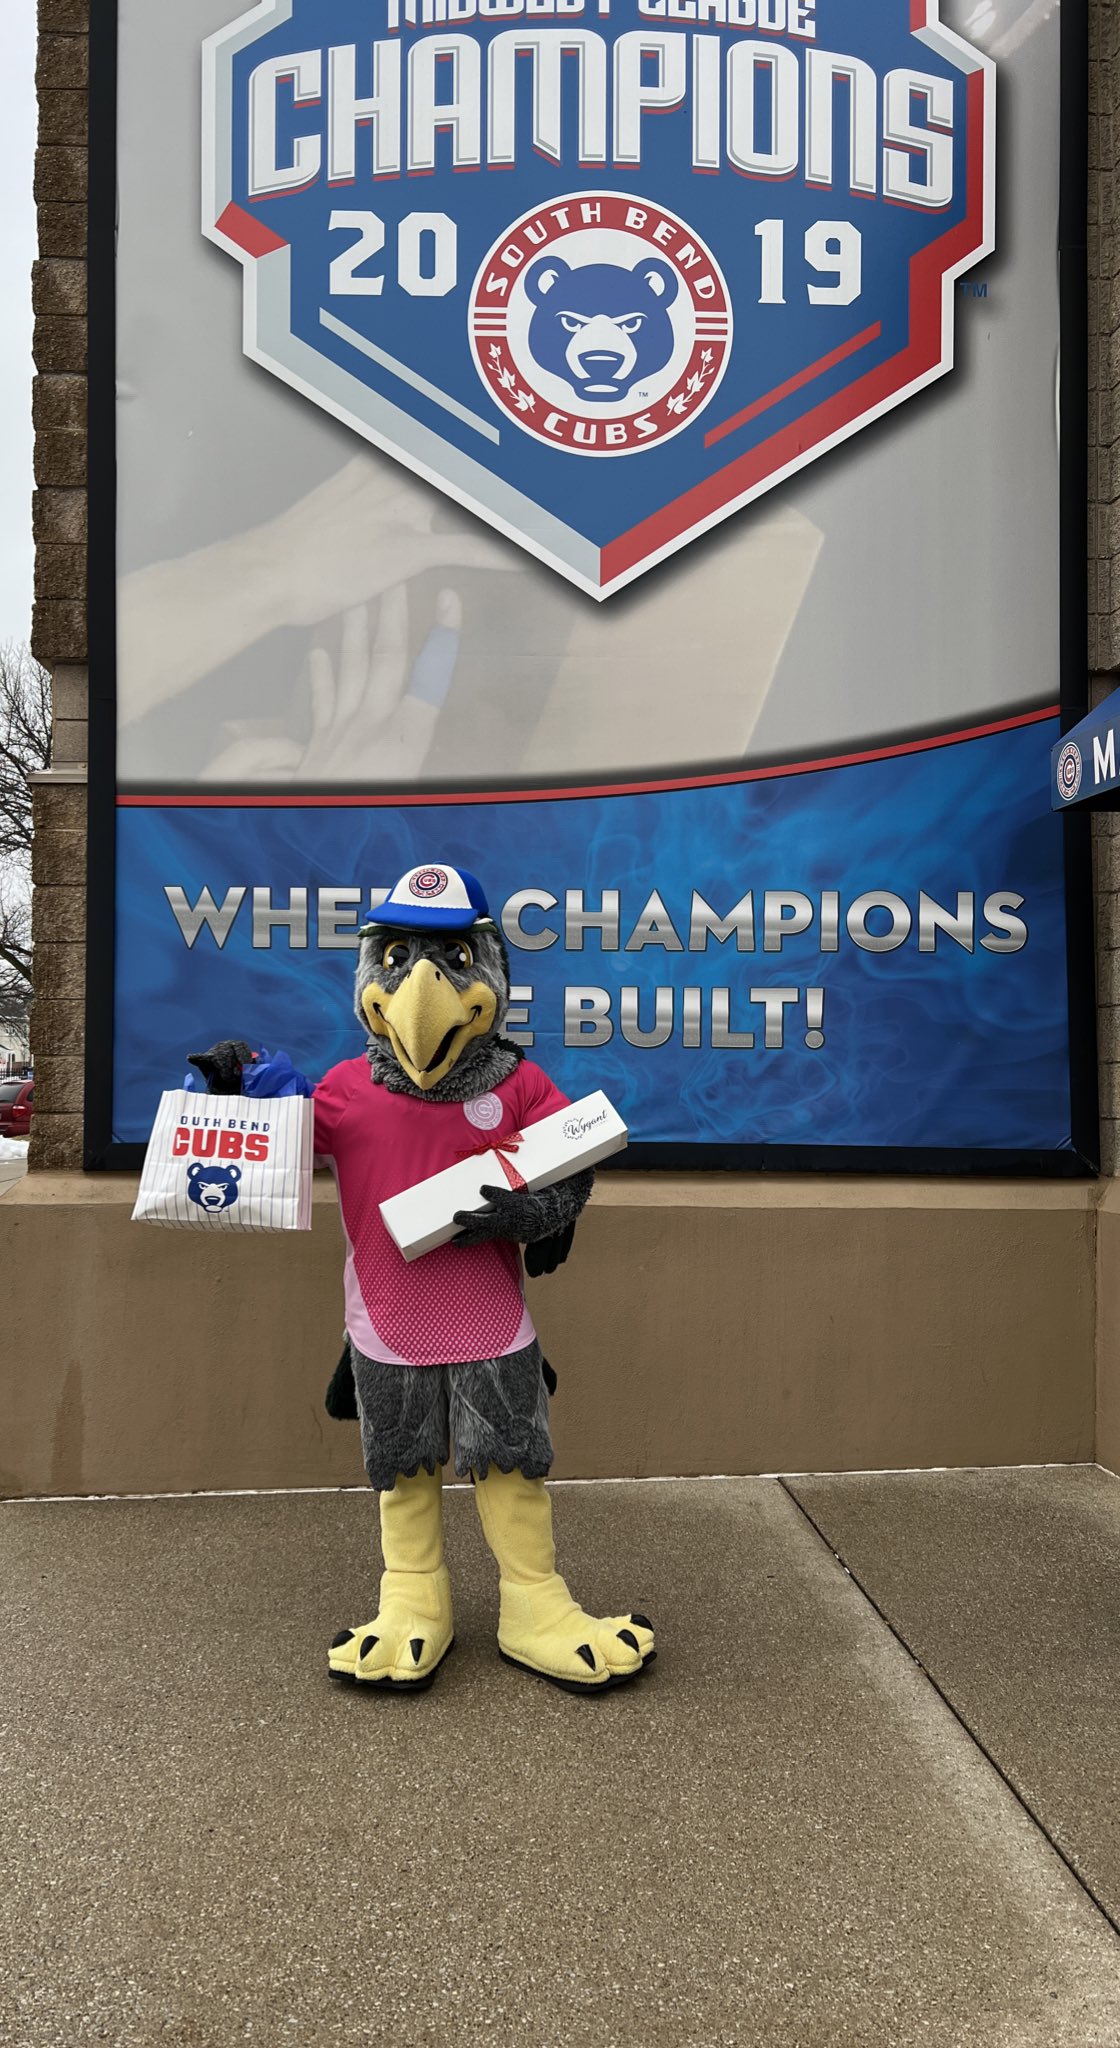 South Bend Cubs Mascot Swoop During Editorial Stock Photo - Stock Image